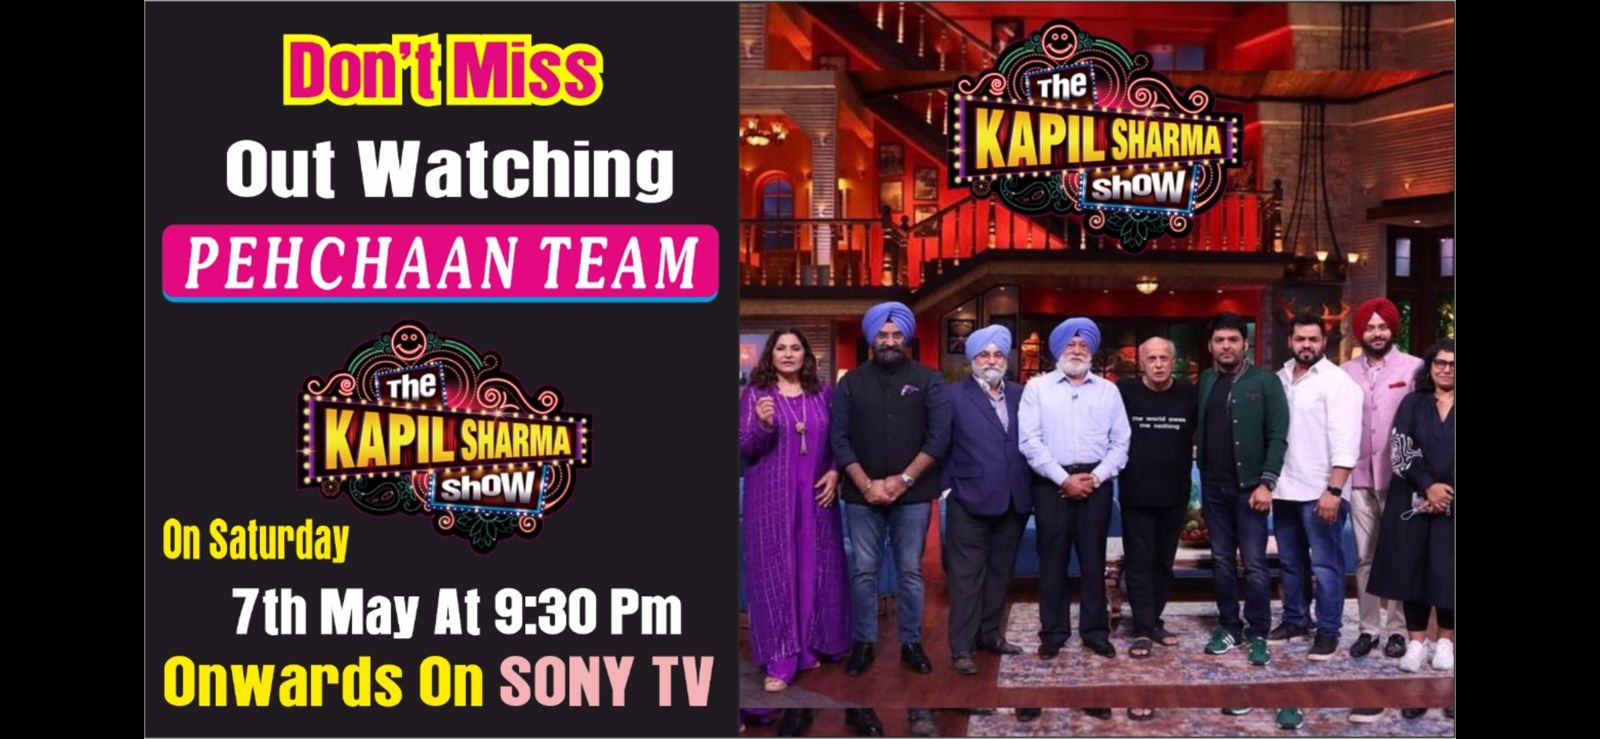 Don’t miss out watching team and esteemed personalities of first ever show on Sikhs based on the books of Dr. Prabhleen Singh hosted by Mahesh Bhatt titled “Pehchaan” for International OTT platform on Kapil Sharma Show today ie 7th May at 9.30 pm onwards on Sony TV.